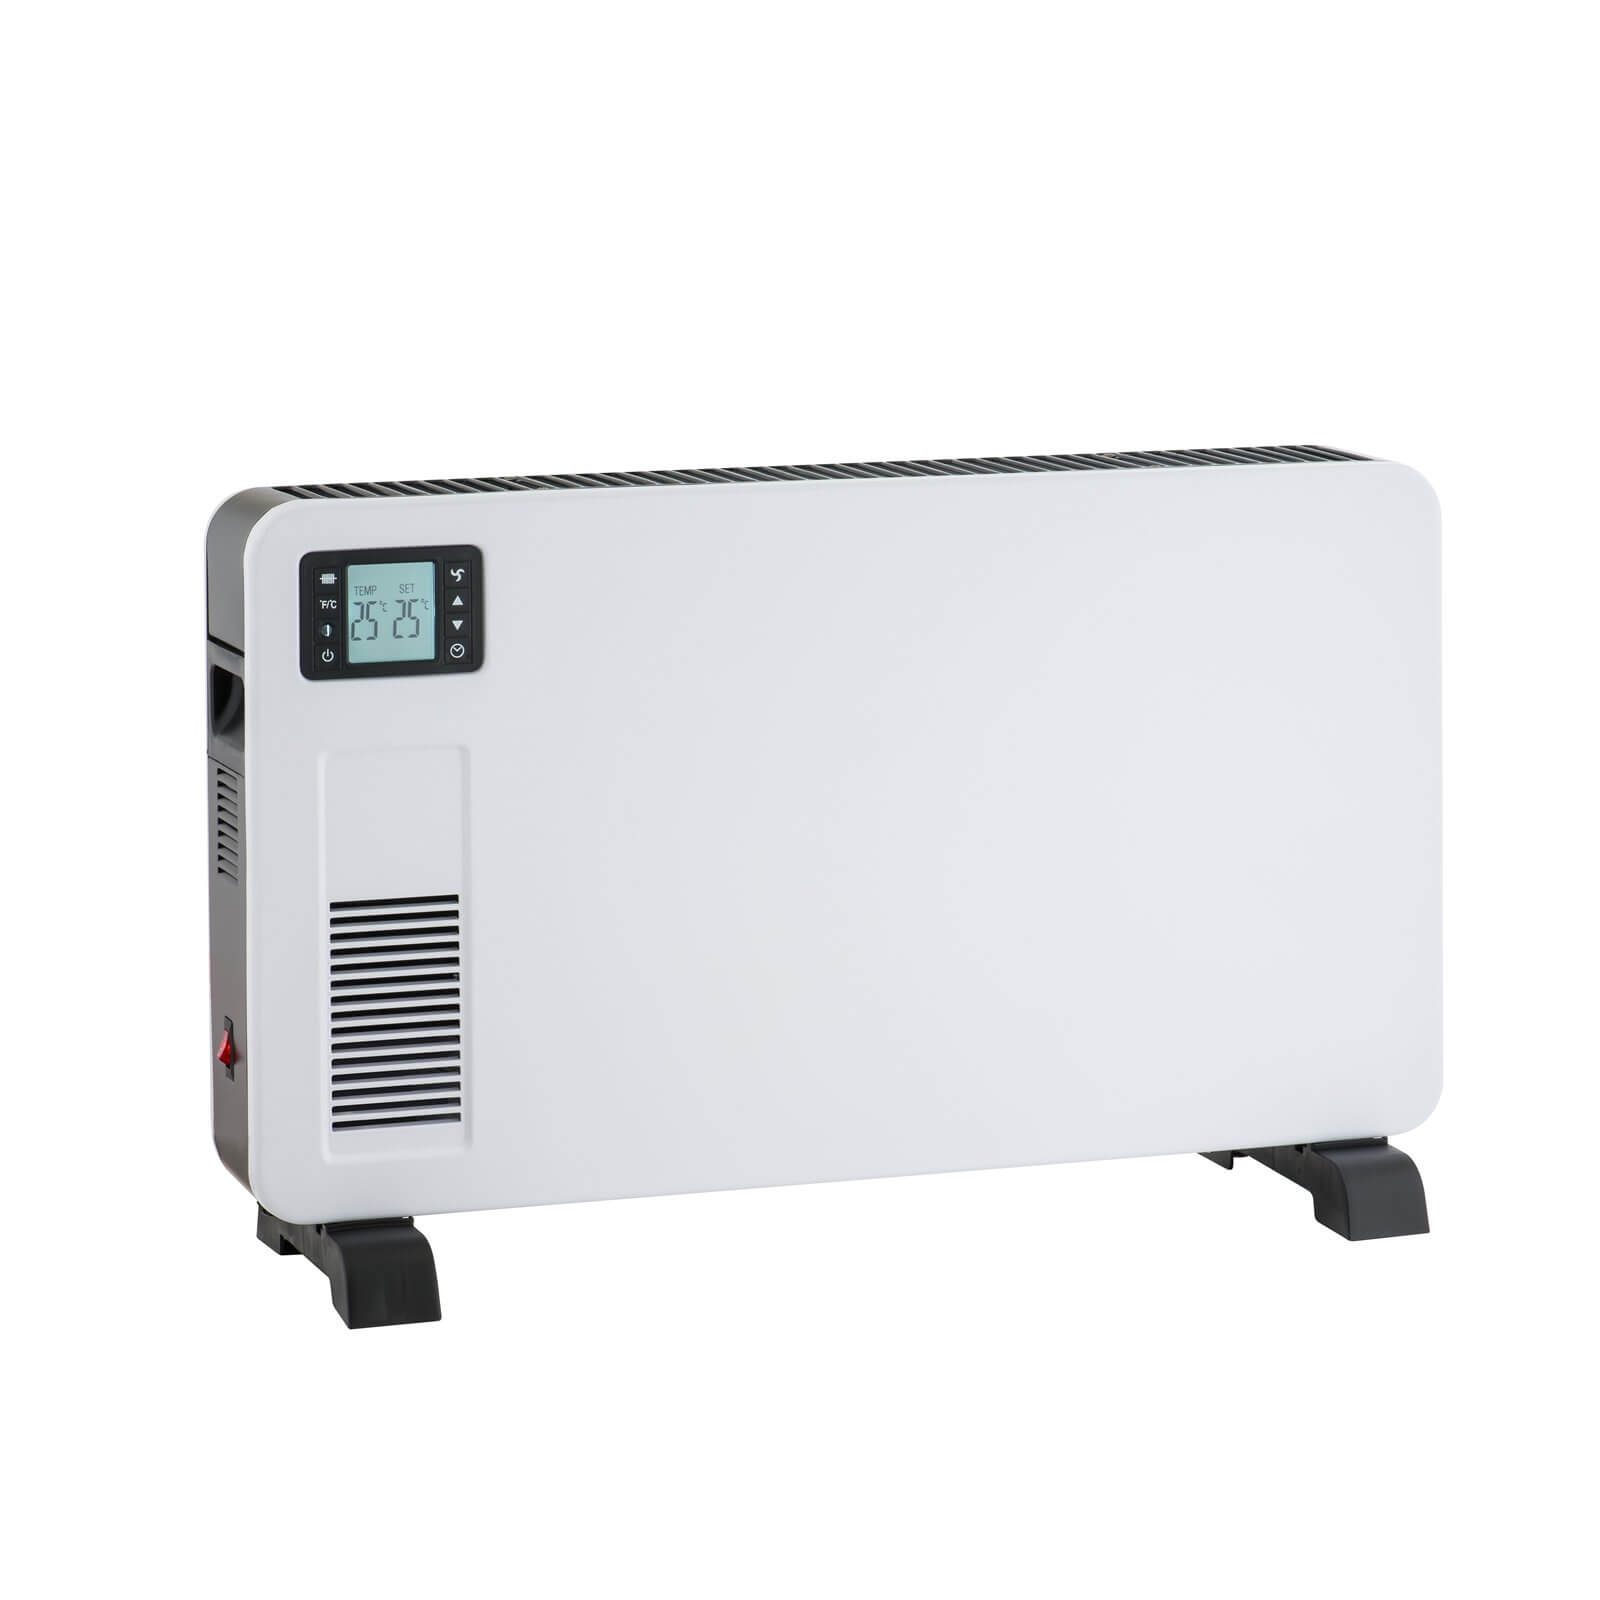 2300W Convection Heater with Remote Control and Timer